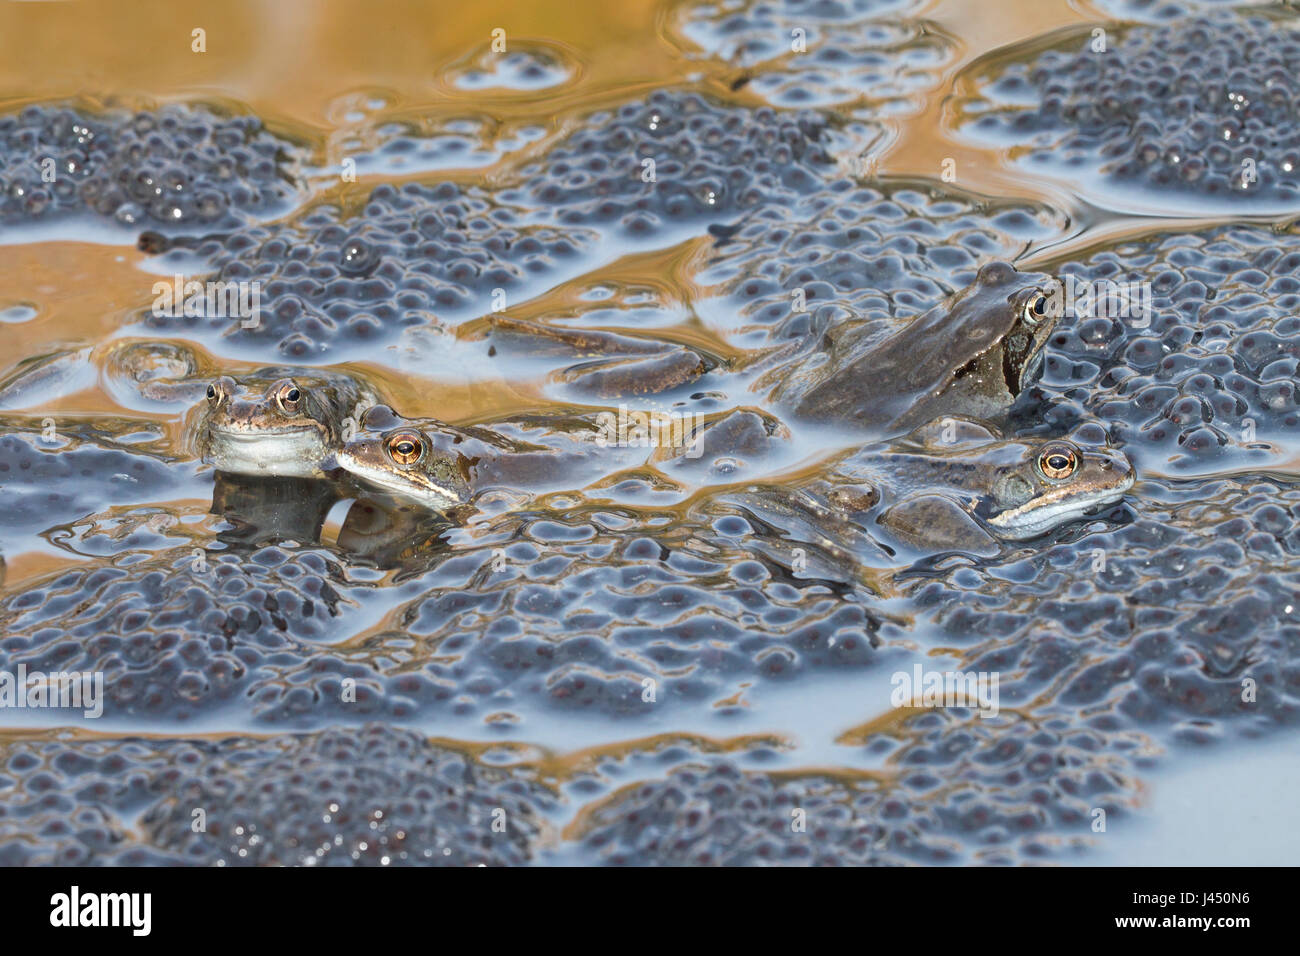 common frogs between frog spawn during mating Stock Photo